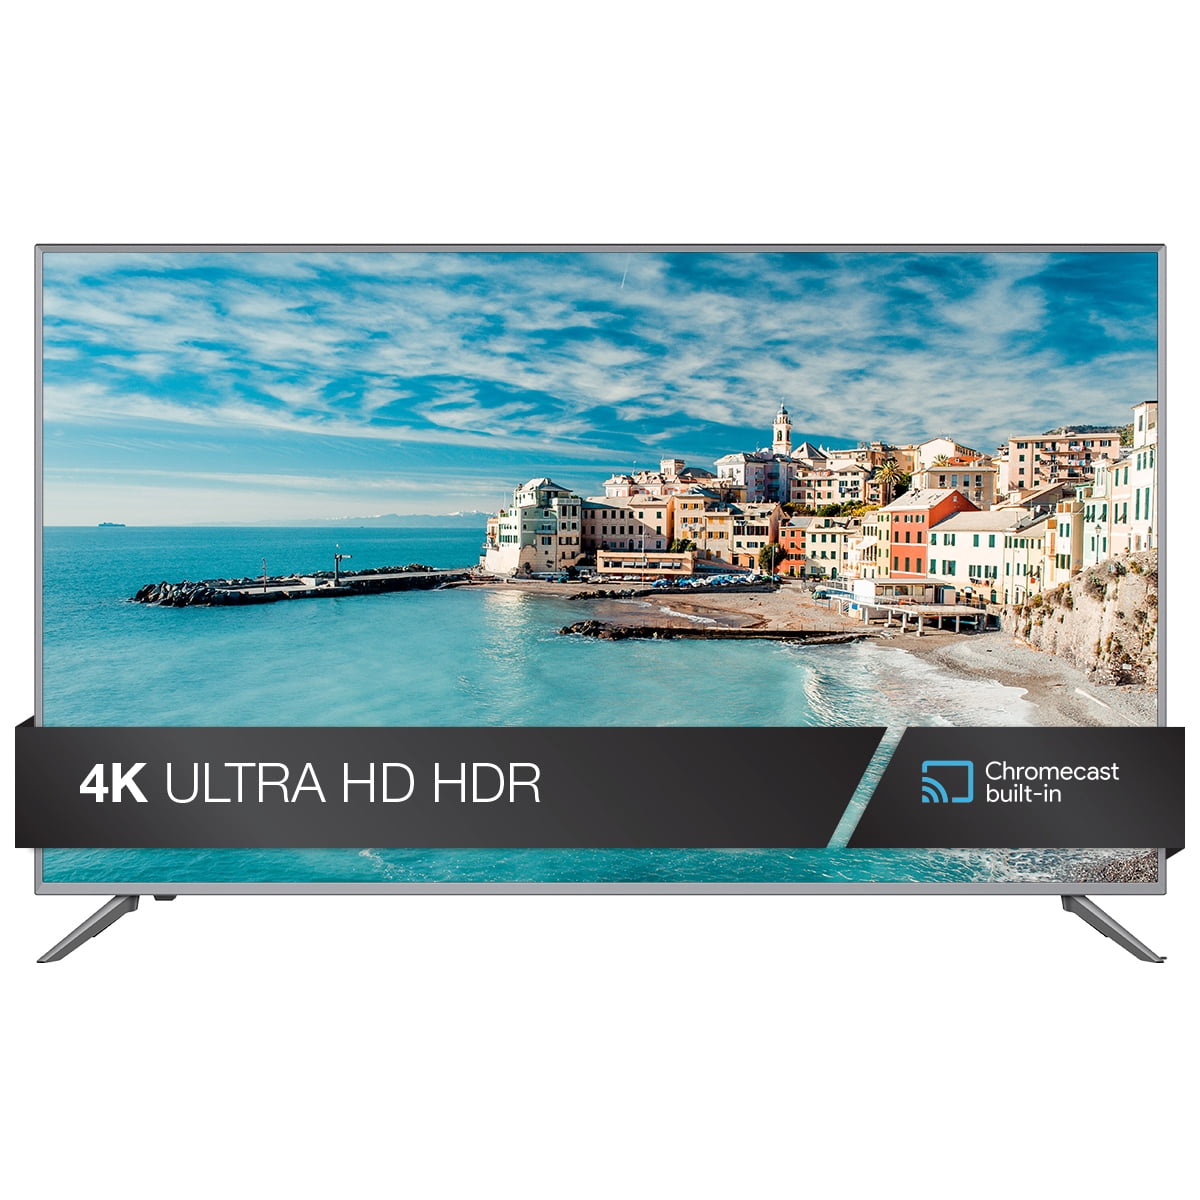 Chromecast TV HD Class Built-in HDR Ultra (2160P) with (LT-55MA875) Smart 4K LED 55\